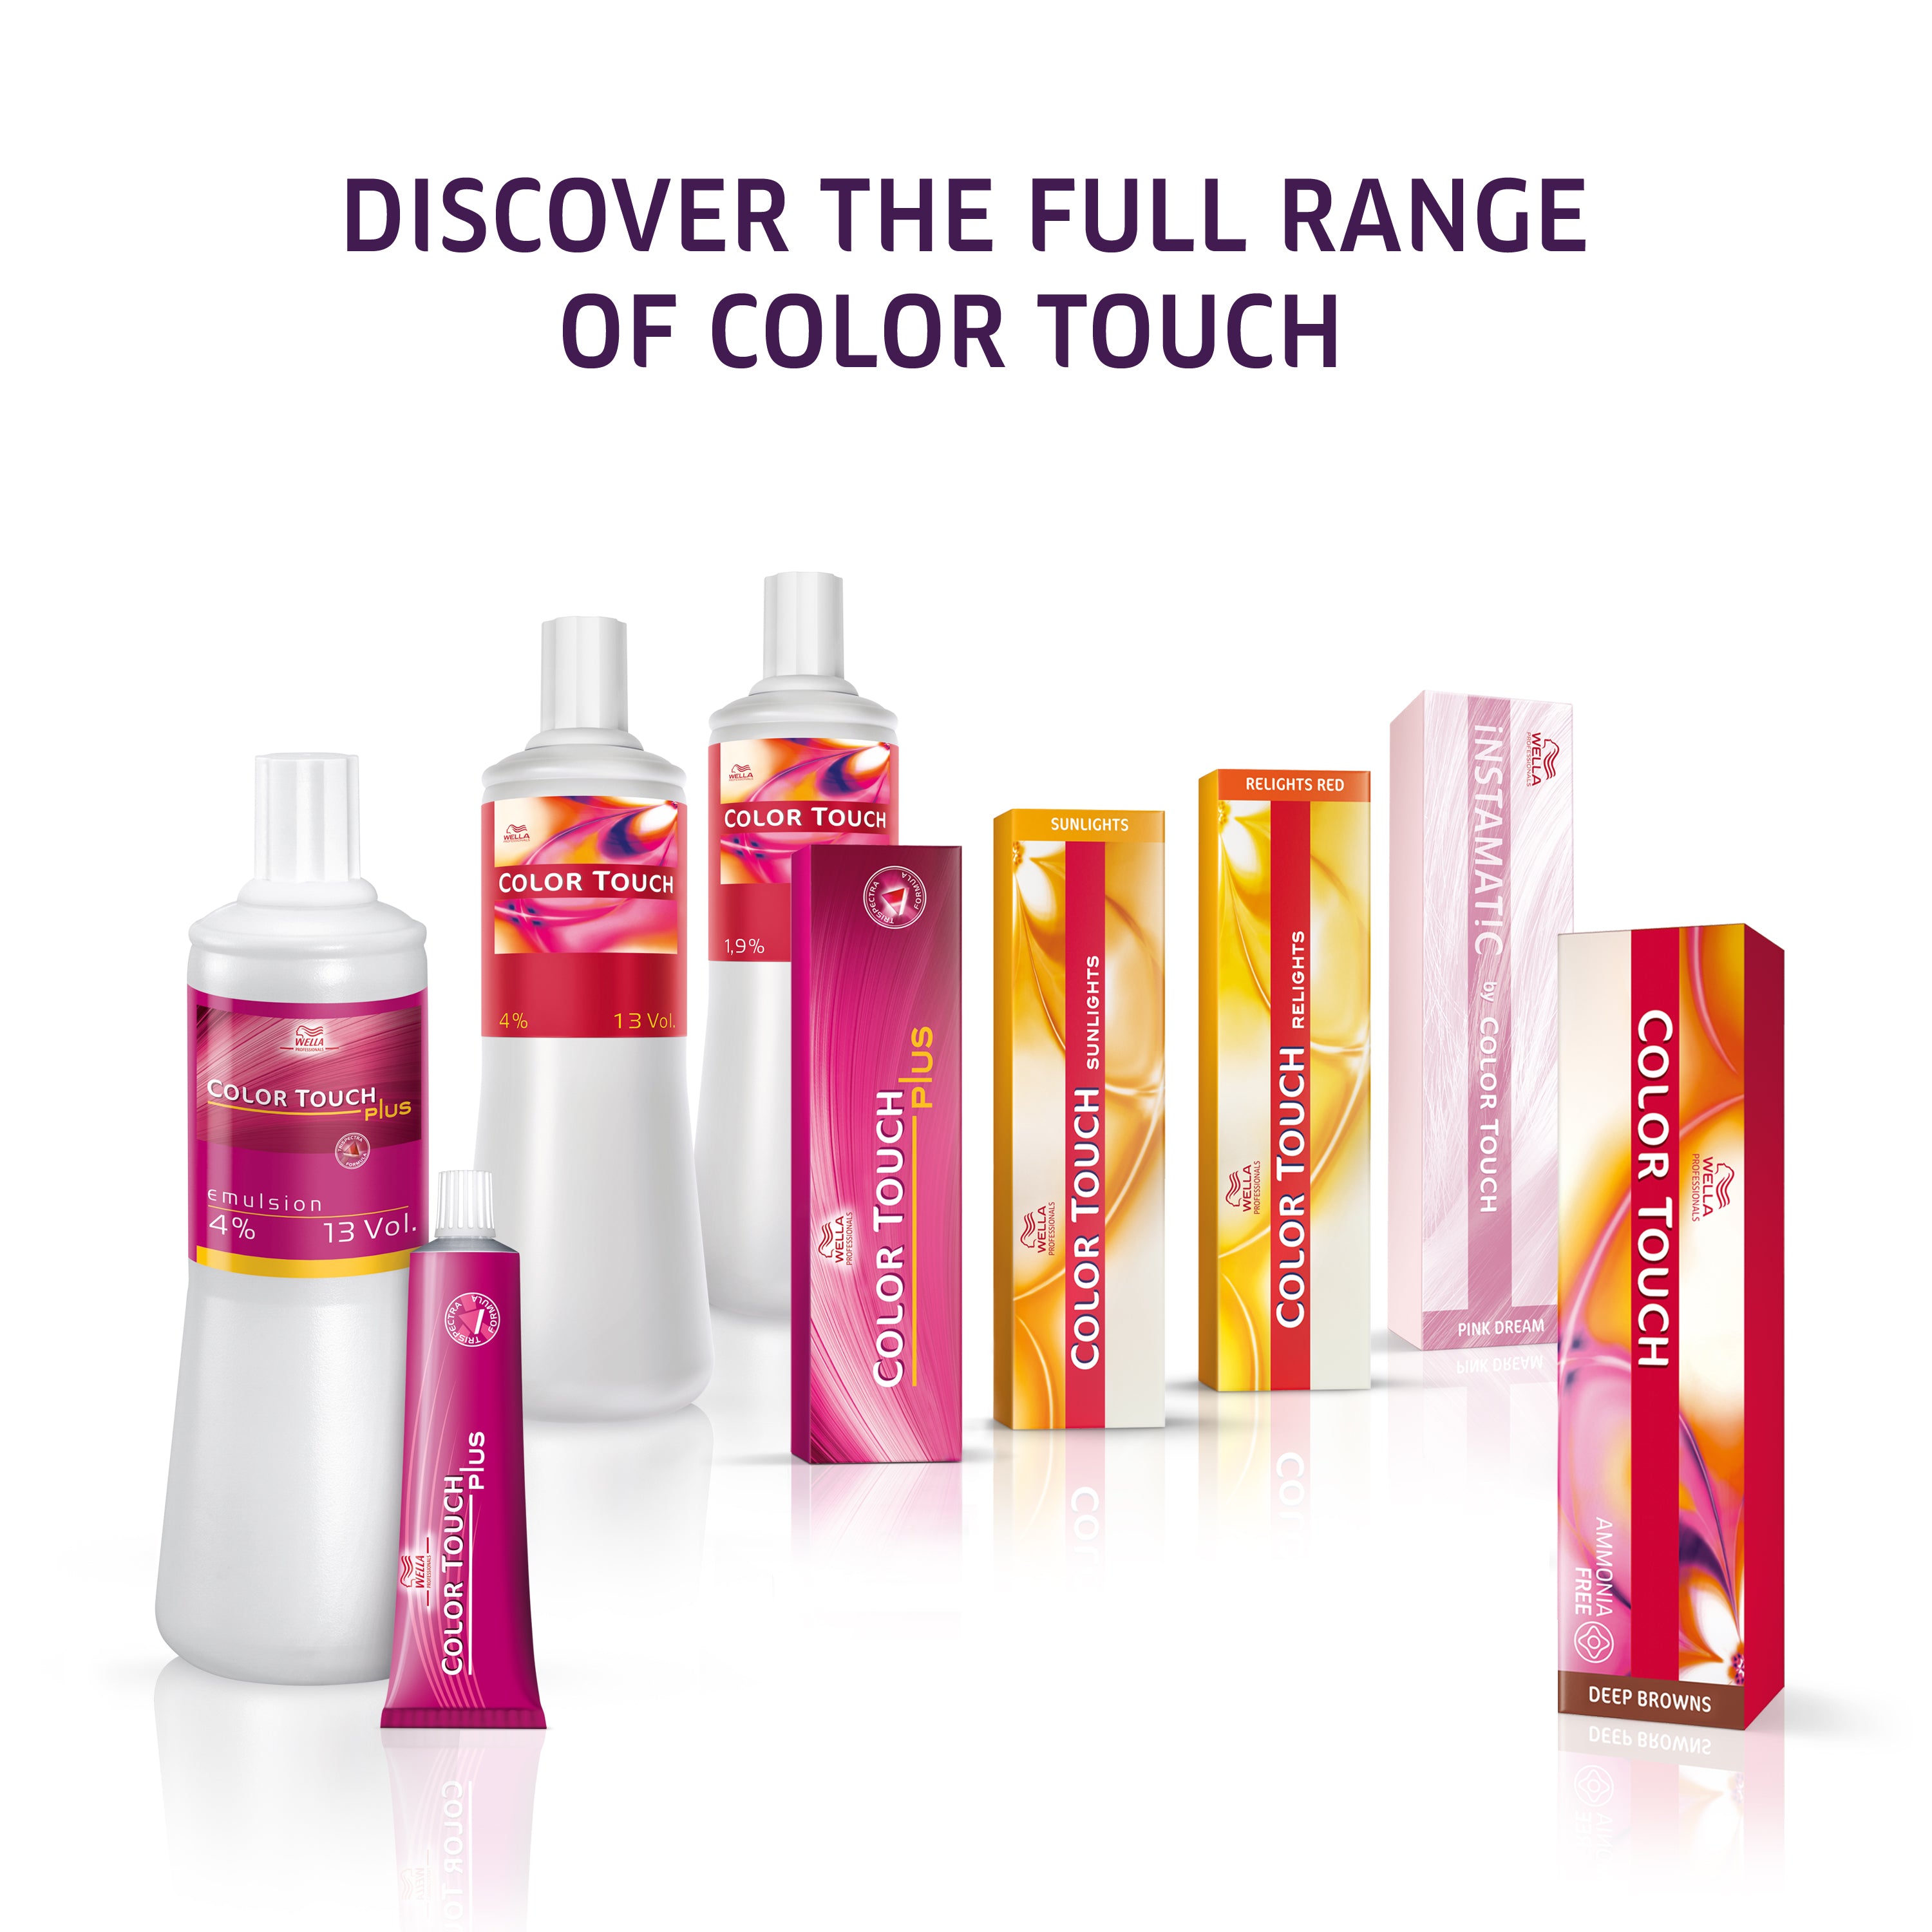 Wella Professional Color Touch Plus 77/03